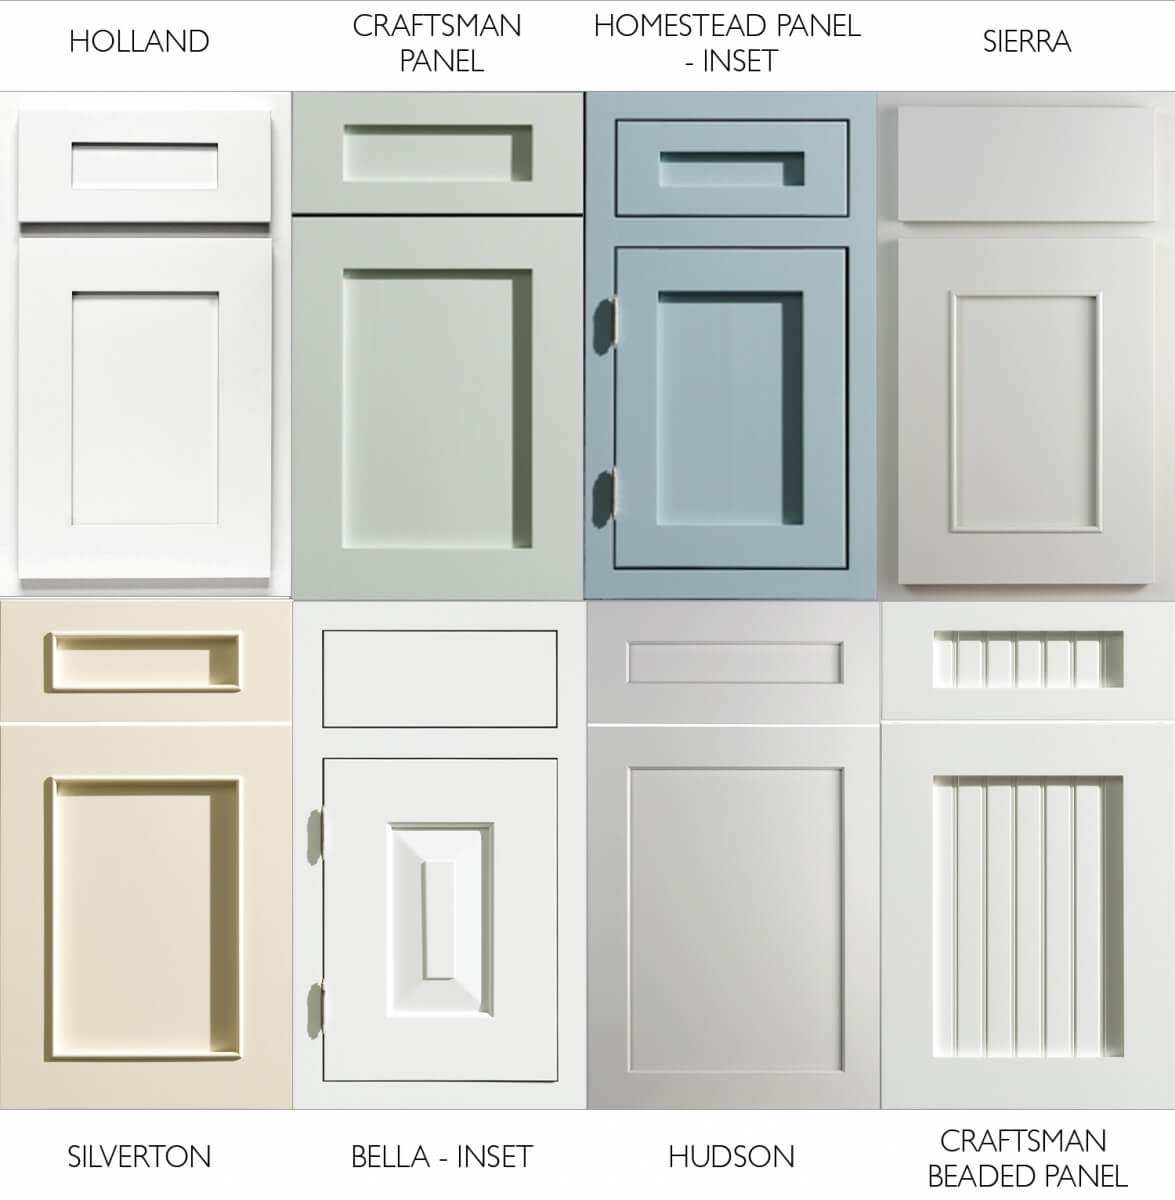 A collection of cottage style cabinet doors for planning a kitchen remodel project. Kitchen cabinet doors from Dura Supreme Cabinetry.